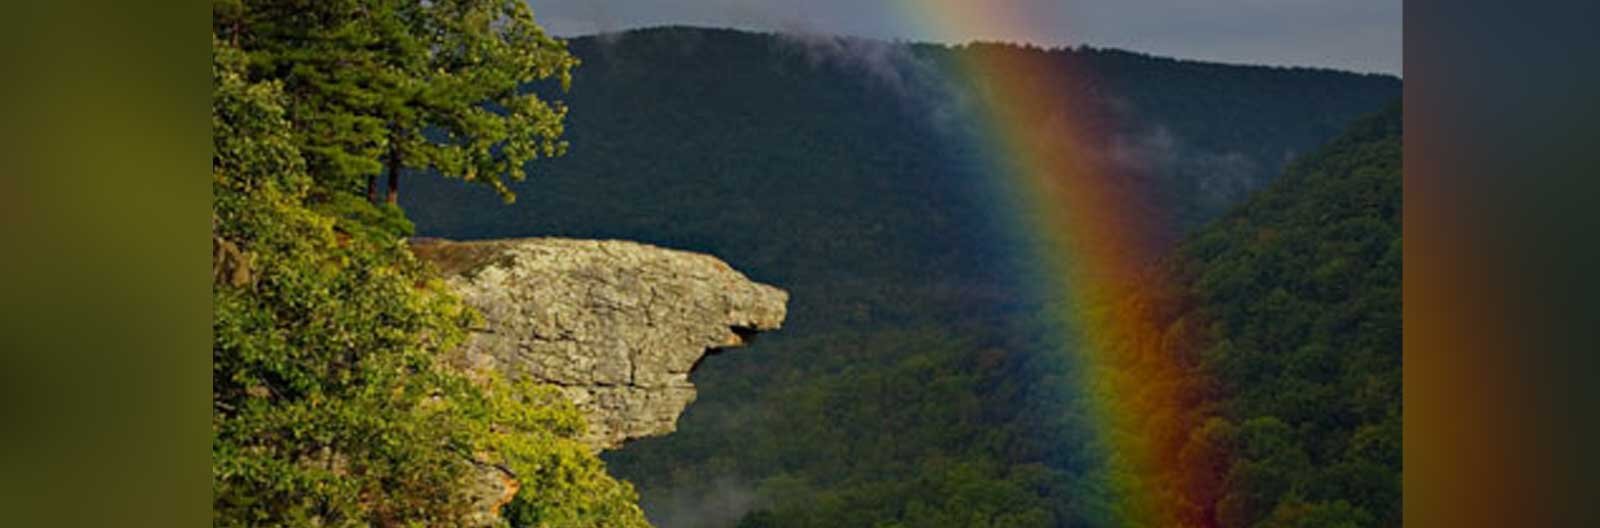 Hawksbill Crag at Whitaker Point, Ozarks National Forest